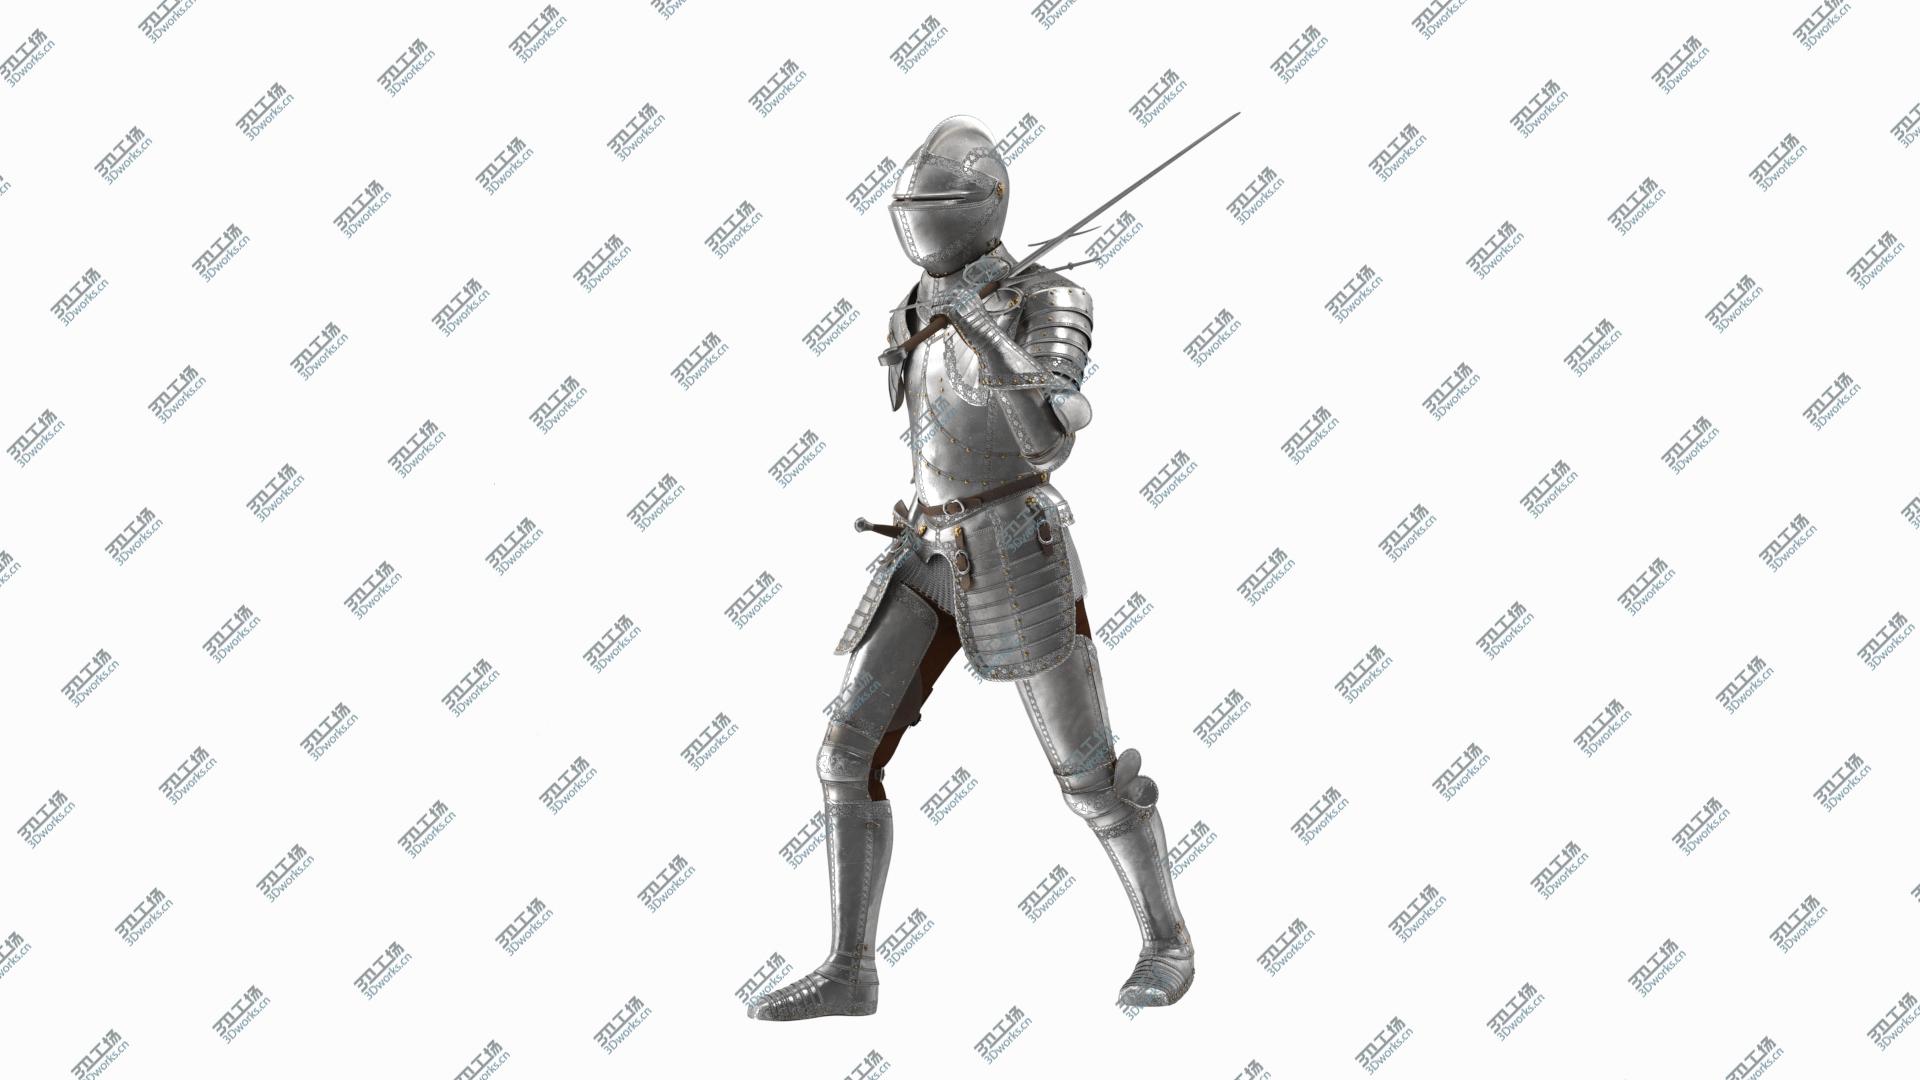 images/goods_img/20210313/3D Medieval Knight Plate Armor Walking Pose/3.jpg